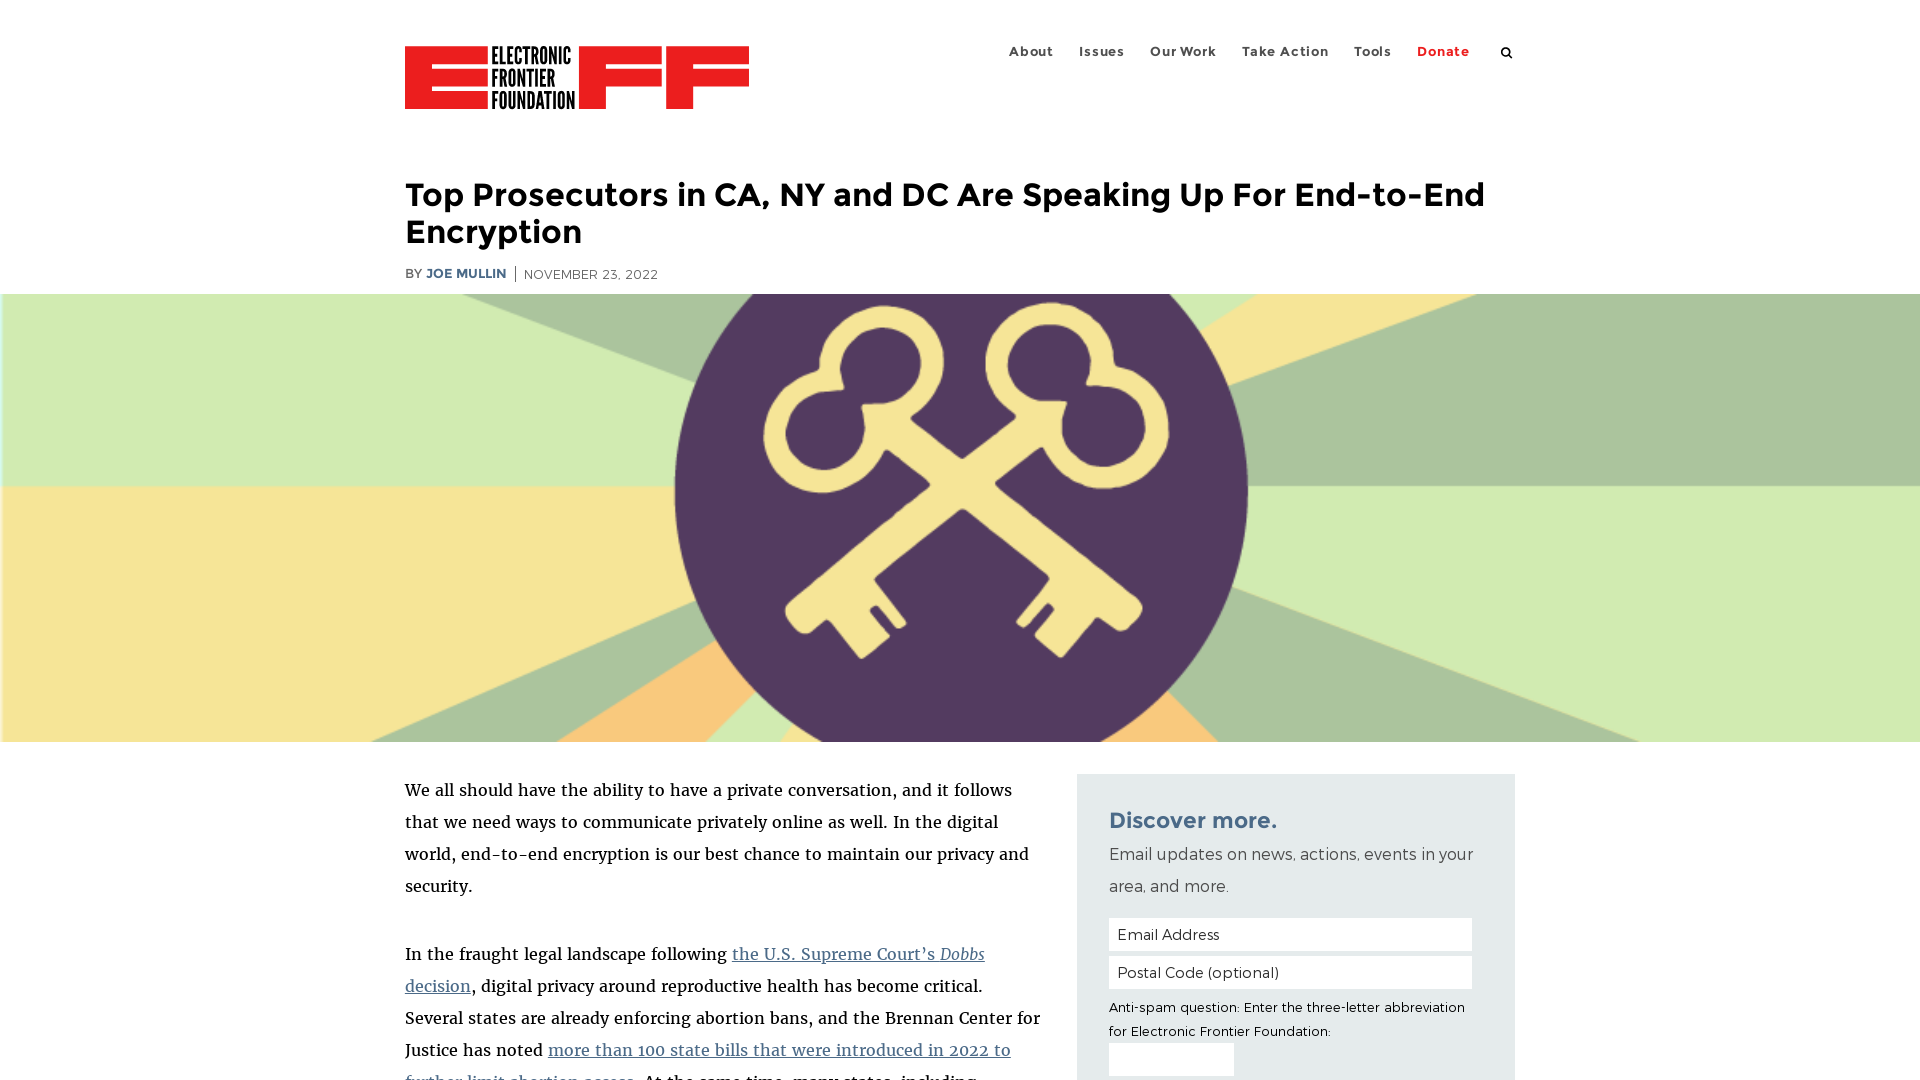 Top Prosecutors in CA, NY and DC Are Speaking Up For End-to-End Encryption | Electronic Frontier Foundation